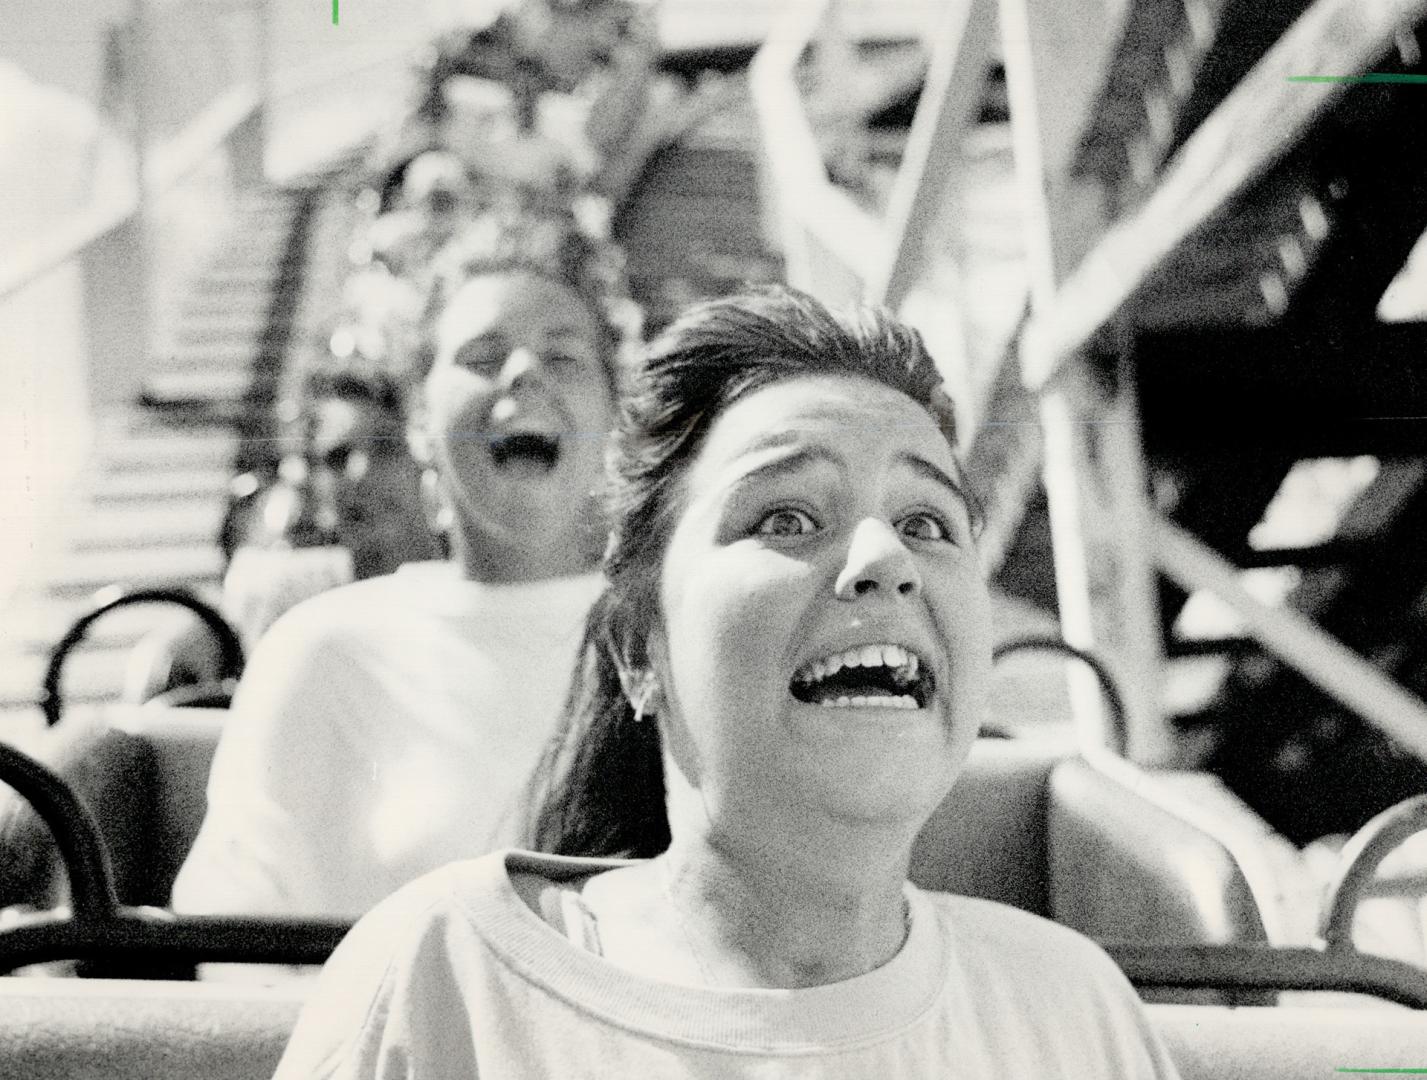 Scream maker: Selena Bishop, 15, of Timmins has a screaming good time on roller coaster at the Canadian National Exhibition yesterday